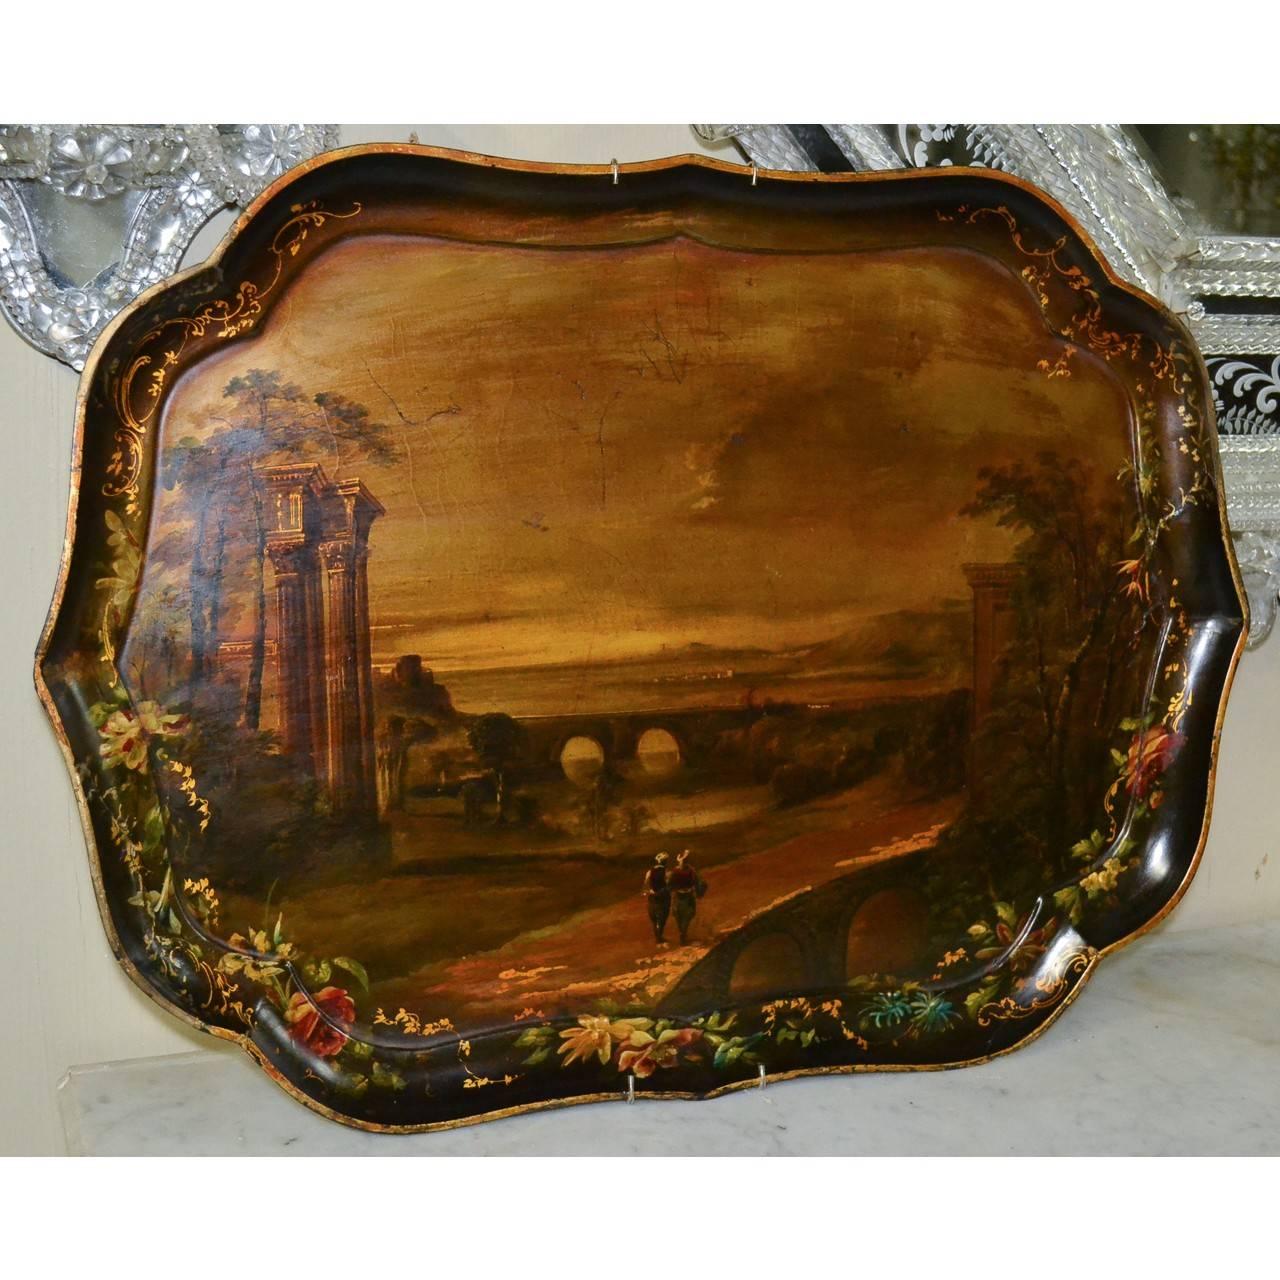 Excellent quality painted Papier Mâché tray by Theodore Jennings and John Bettridge. They started in Birmingham and later started a branch in London.
fl. 1815-1864.